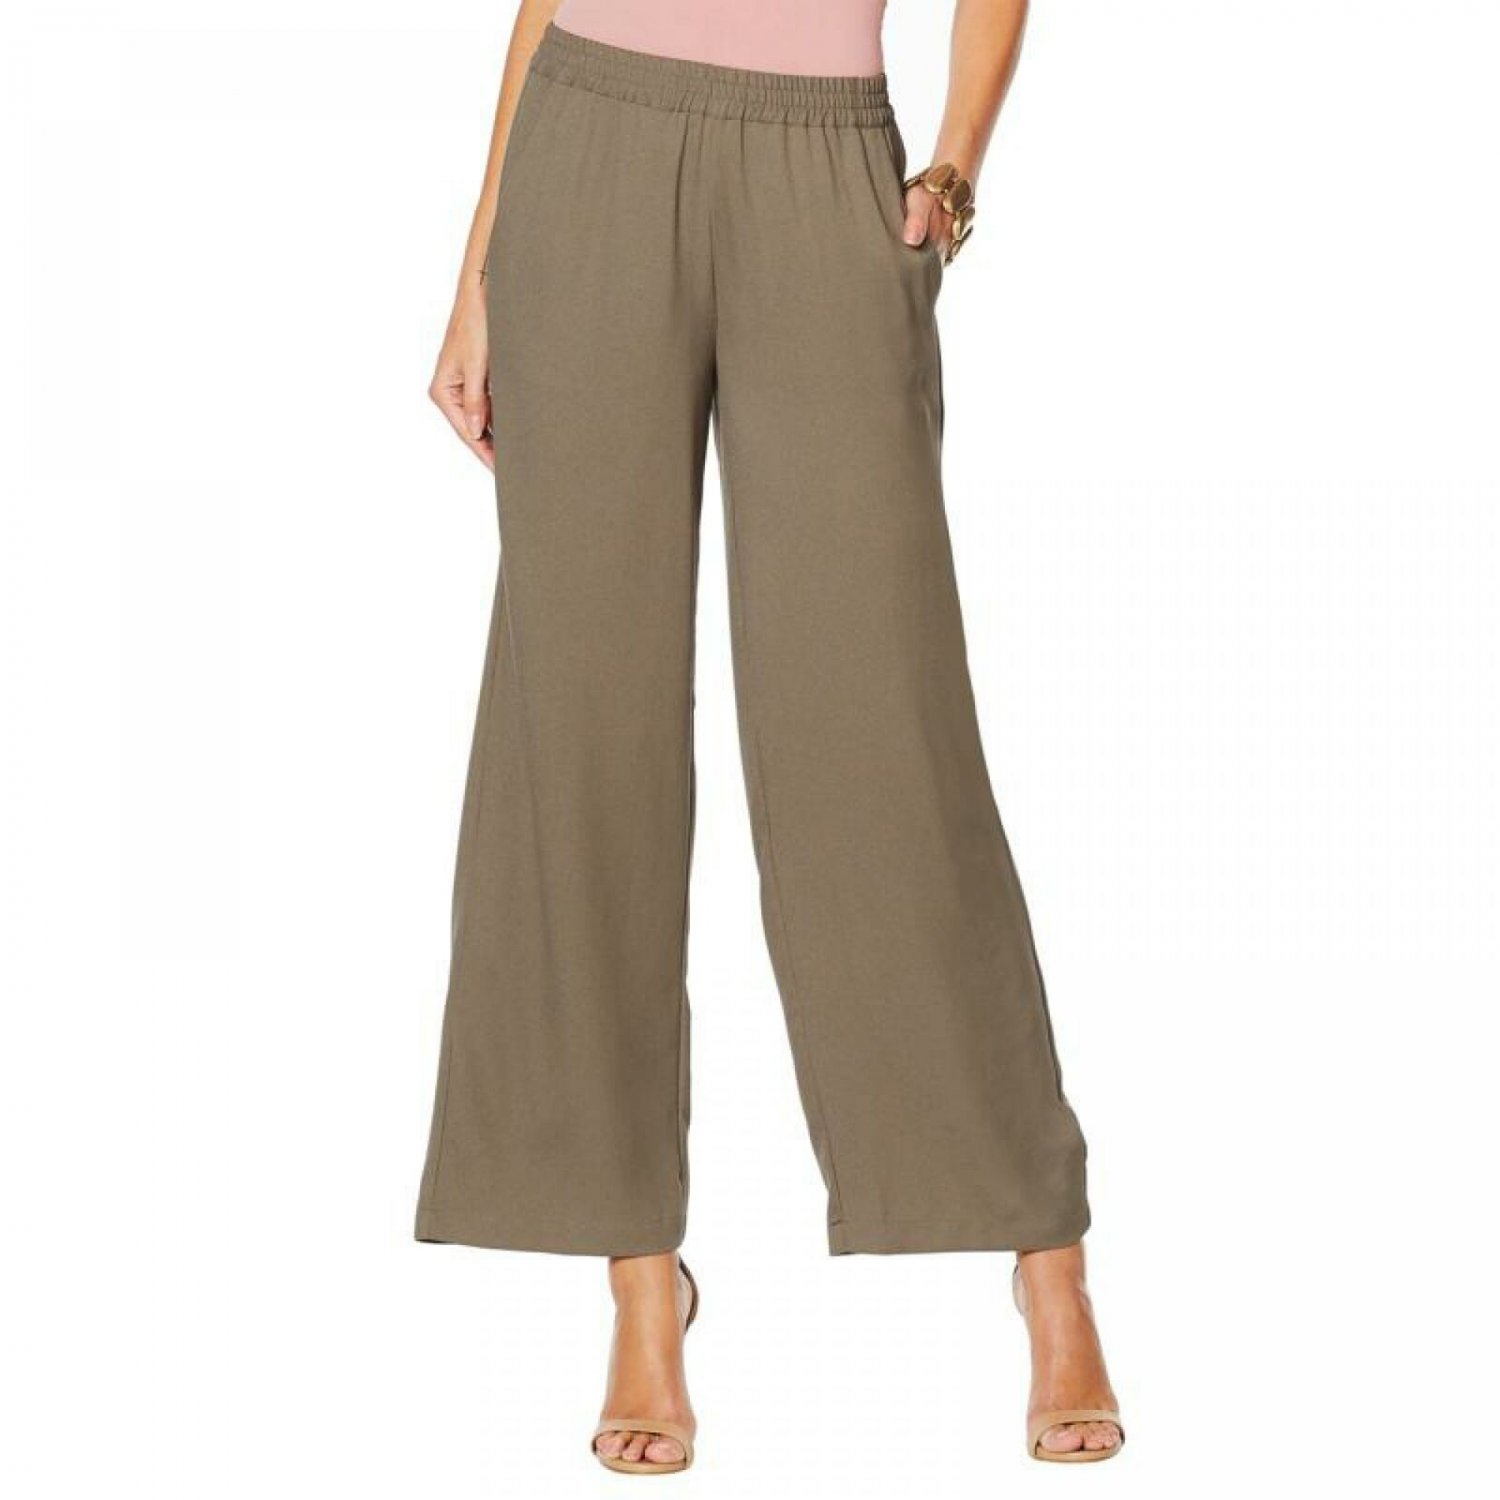 MarlaWynne WynneLayers Women's Crepe Pull On Pants Large Olive Gray